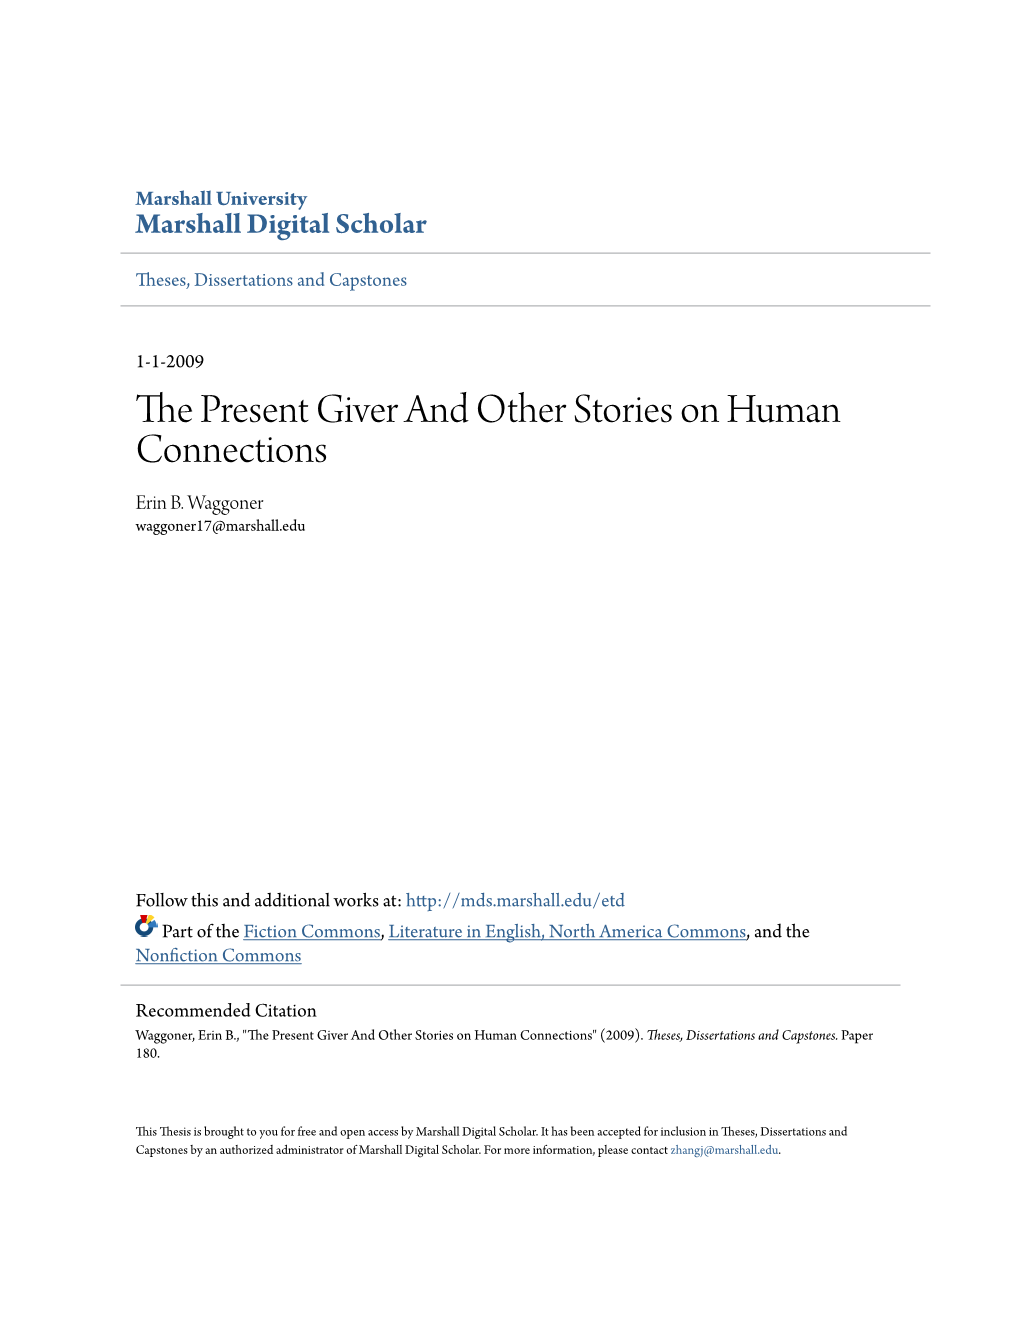 The Present Giver and Other Stories on Human Connections